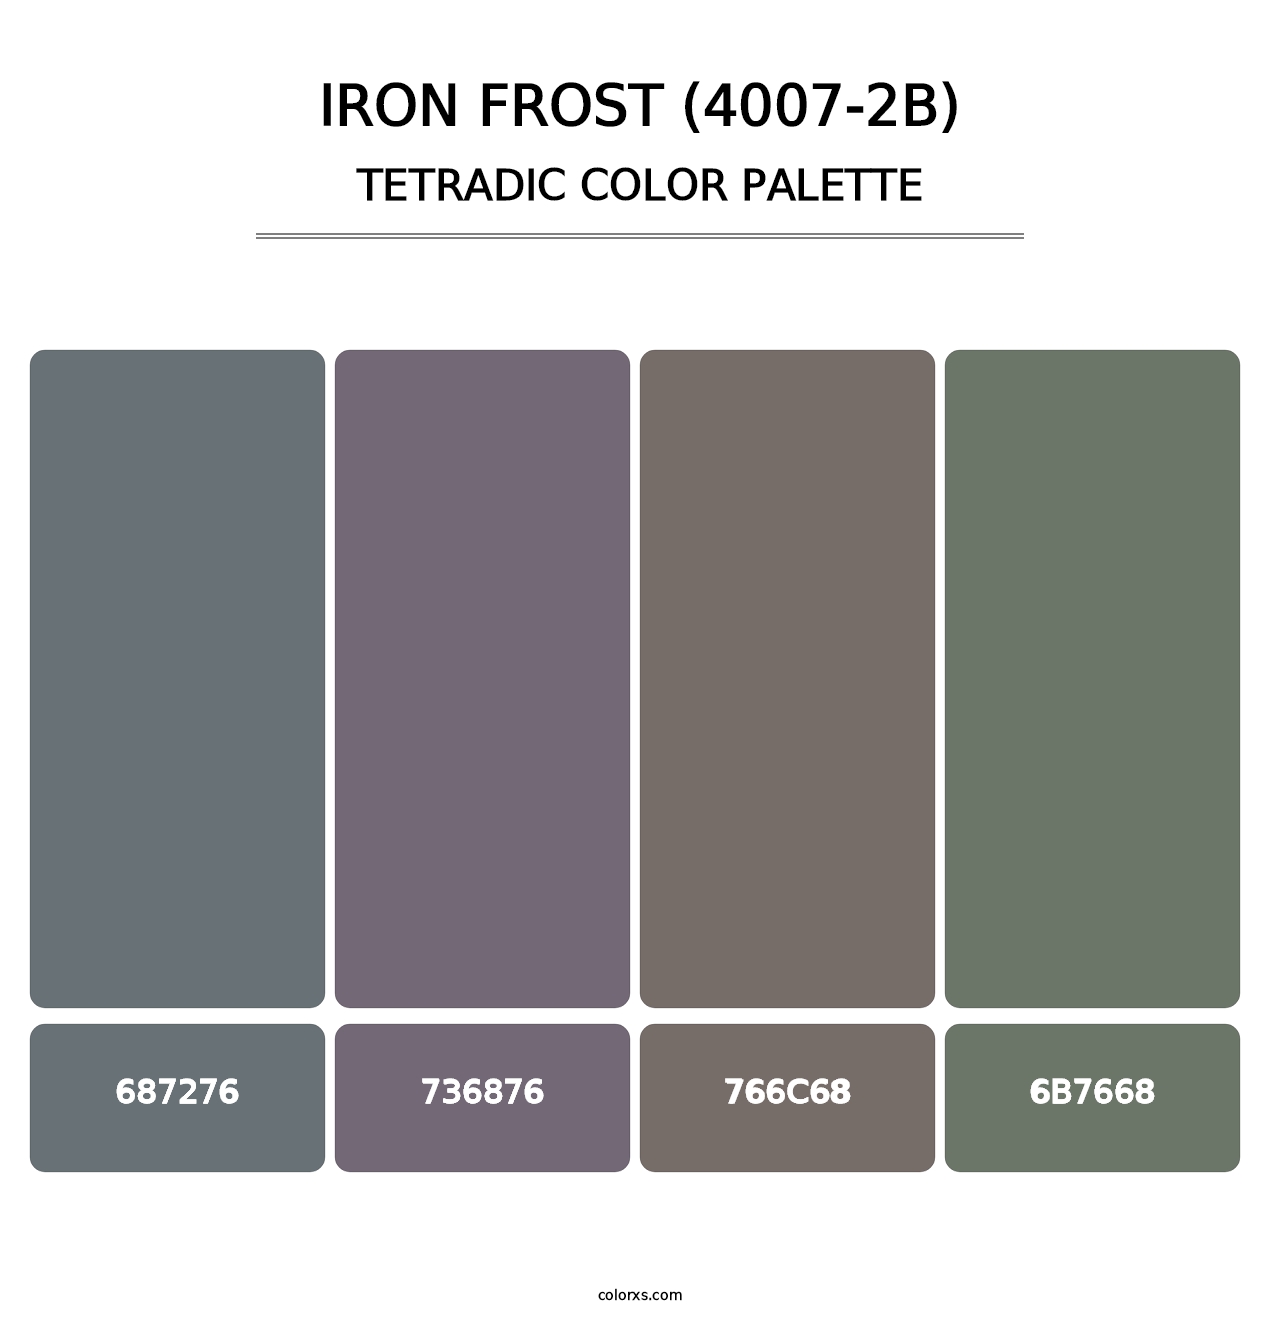 Iron Frost (4007-2B) - Tetradic Color Palette